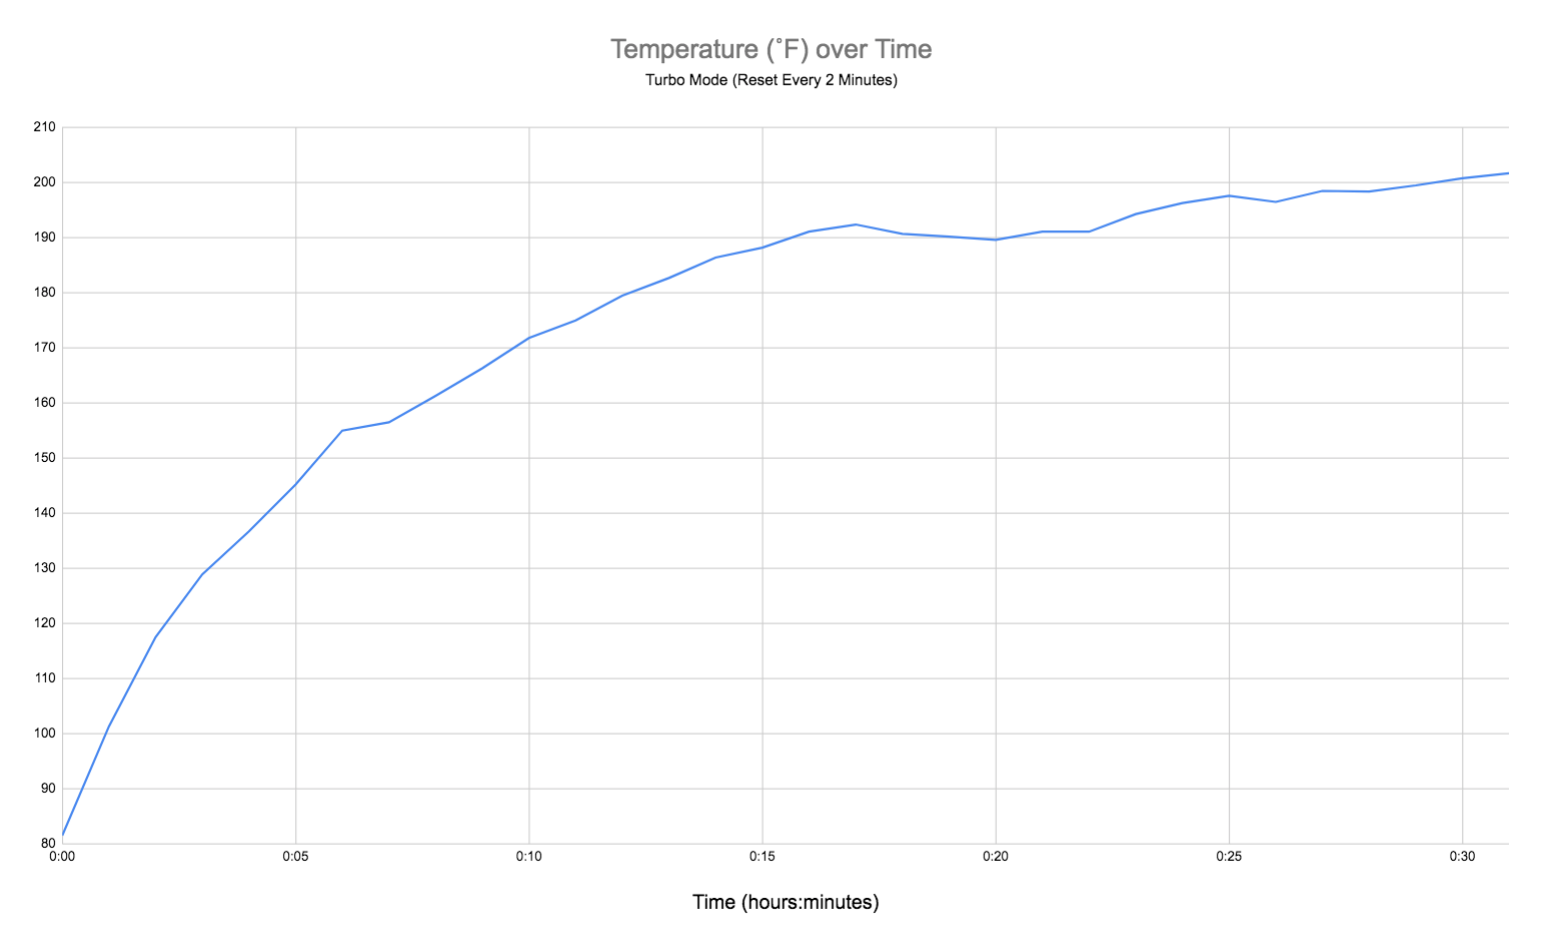 Wowtac A7 - Temp Over Time Turbo Only Mode